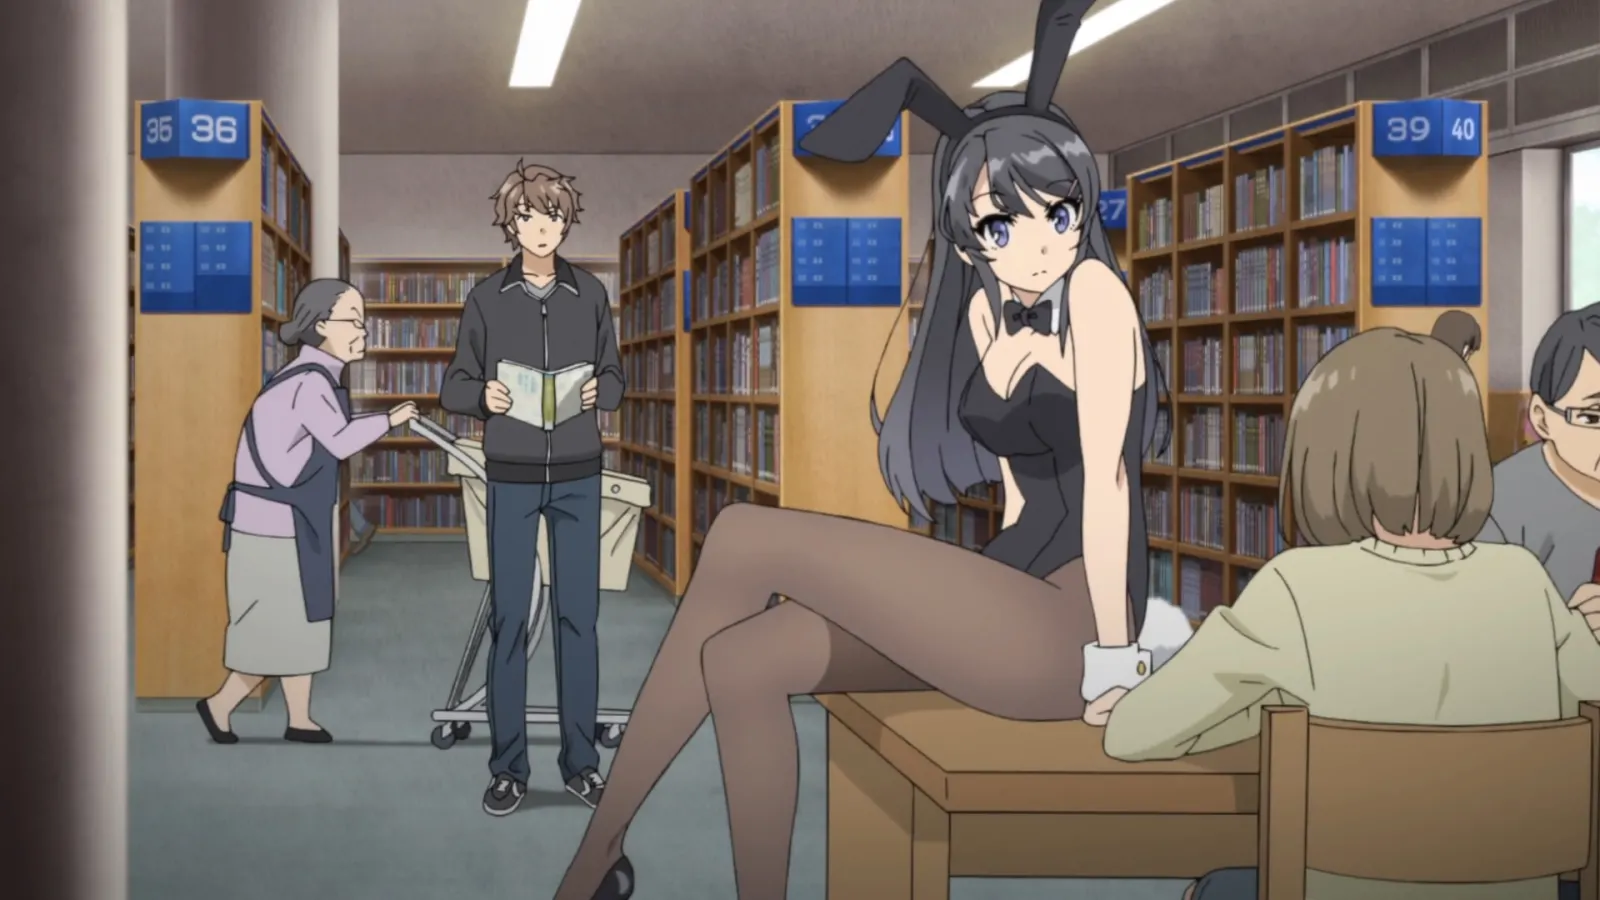 Just a random sort-of-invisible bunny girl at the library, nothing out of the ordinary.